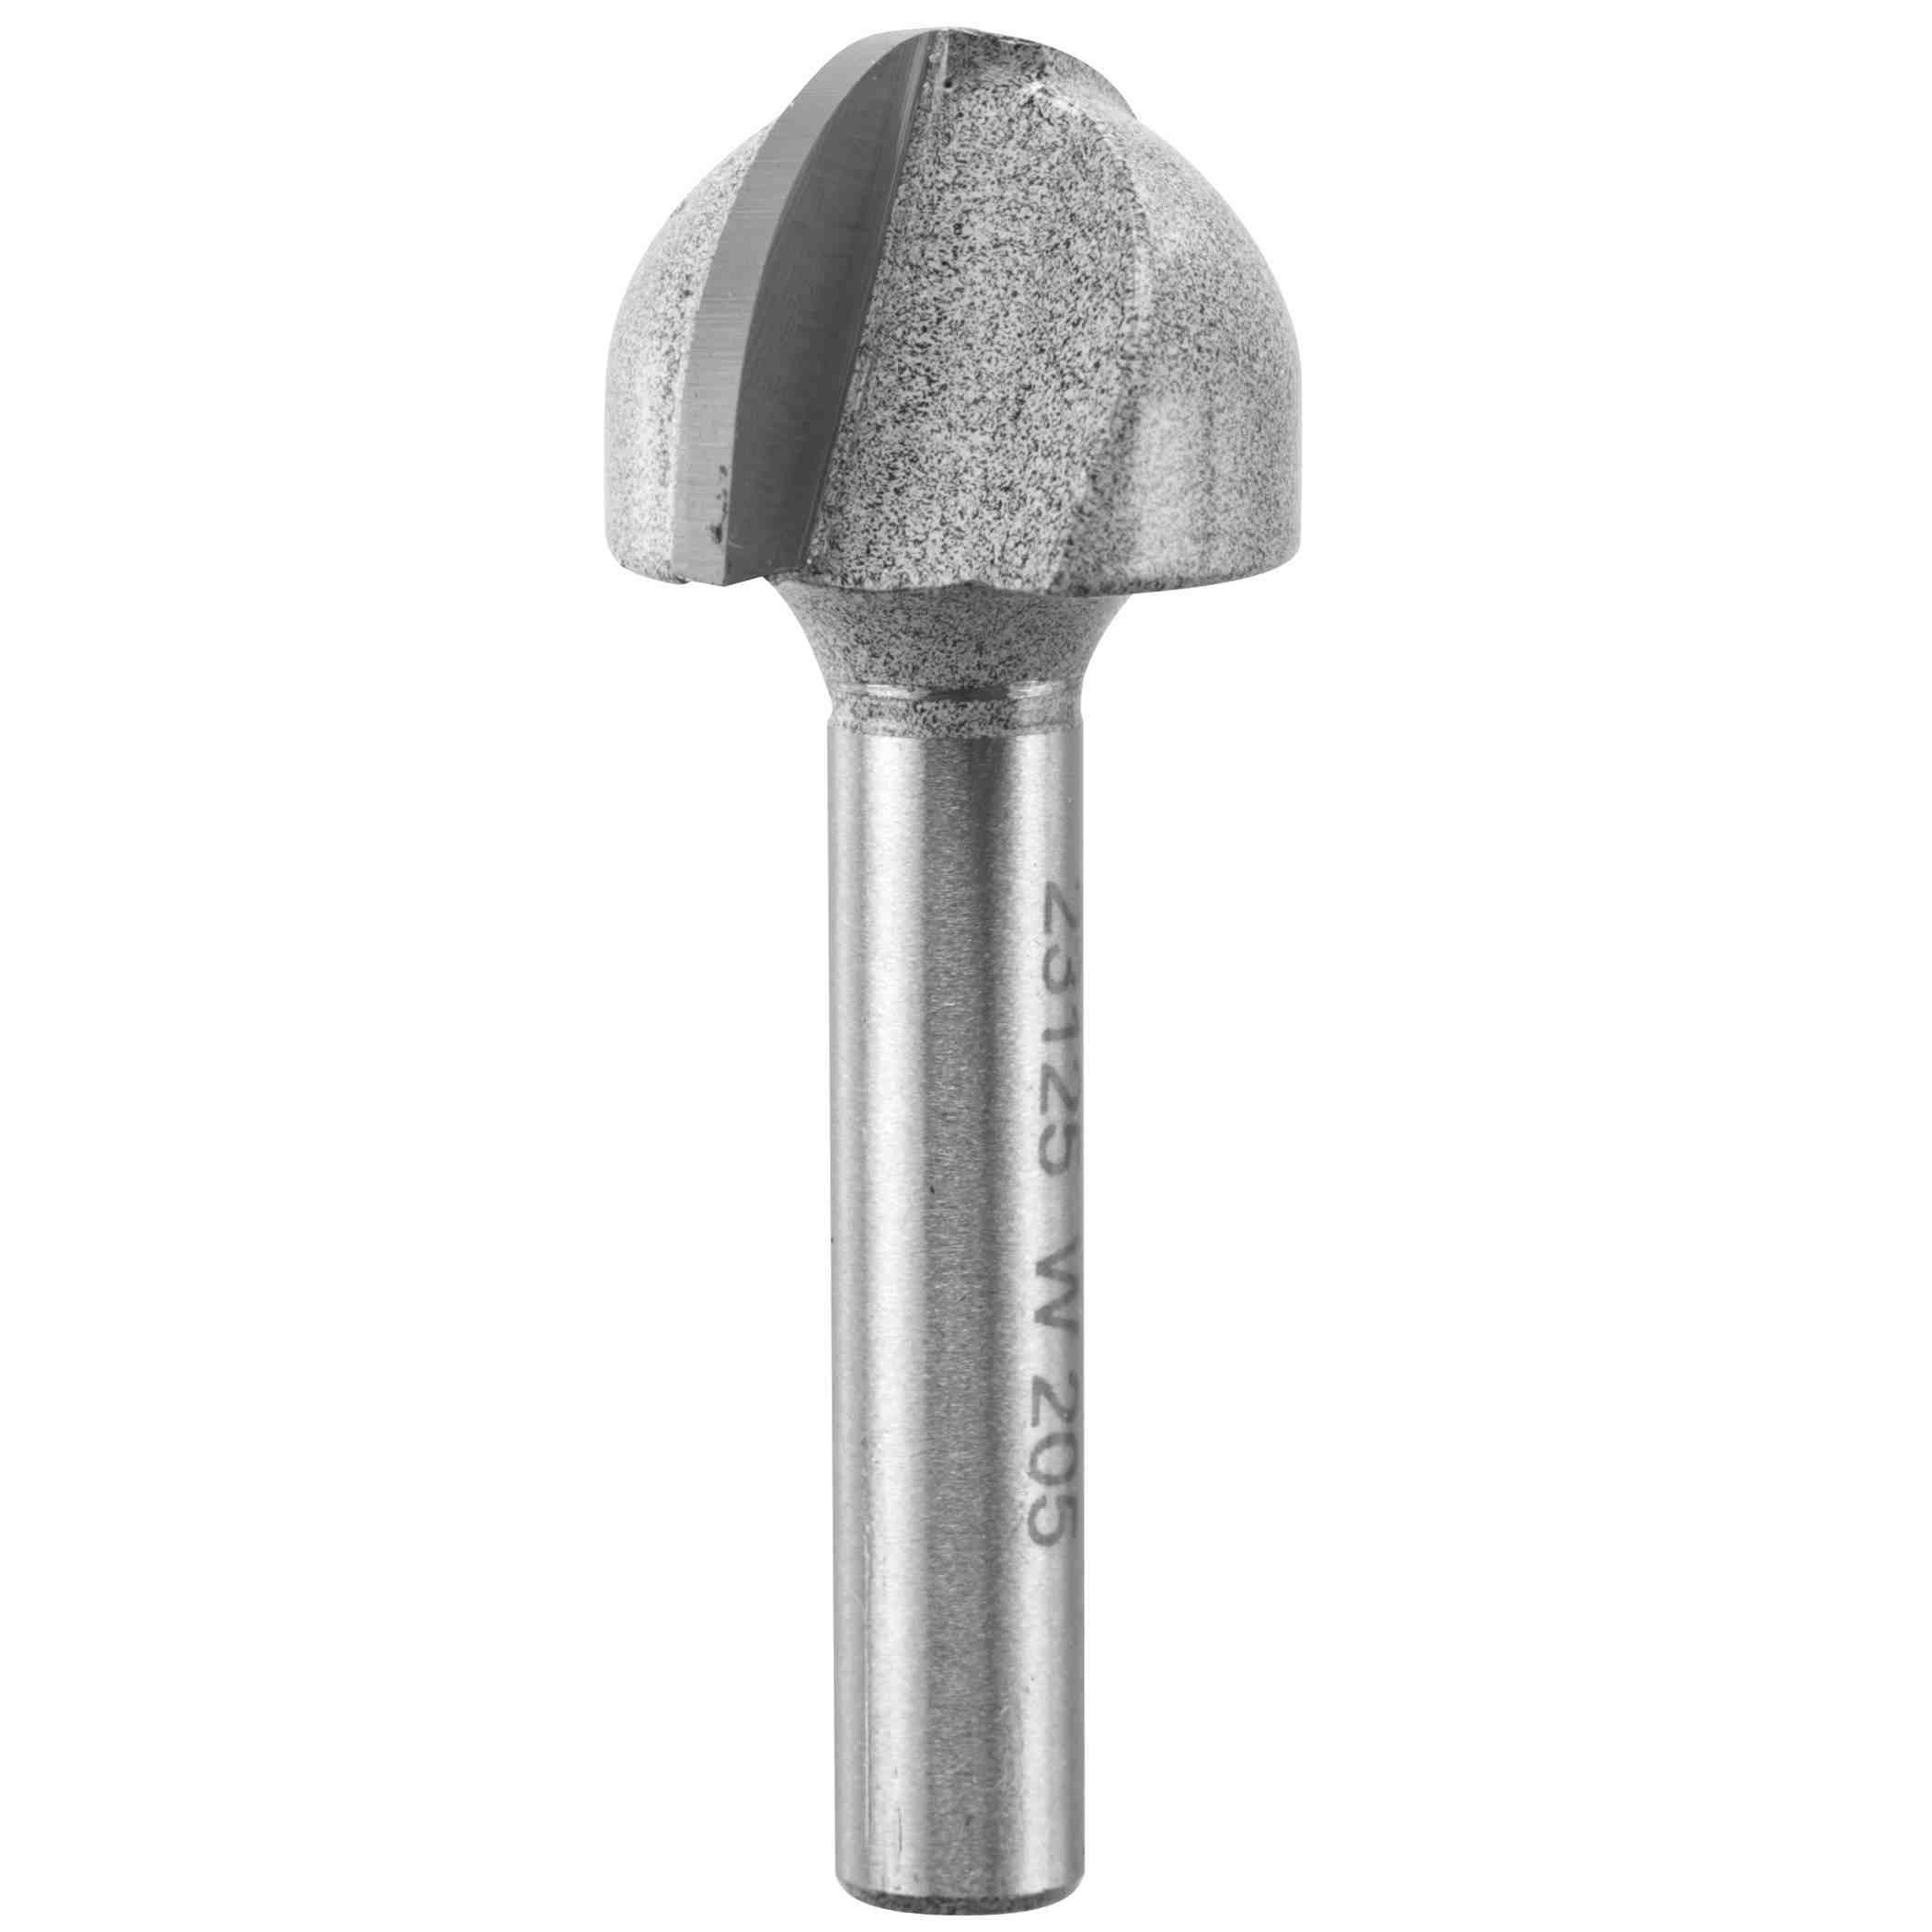 Vermont American 23128 1/4-Inch Carbide Tipped Ovolo Router Bit 2-Flute 1/4-Inch Shank 